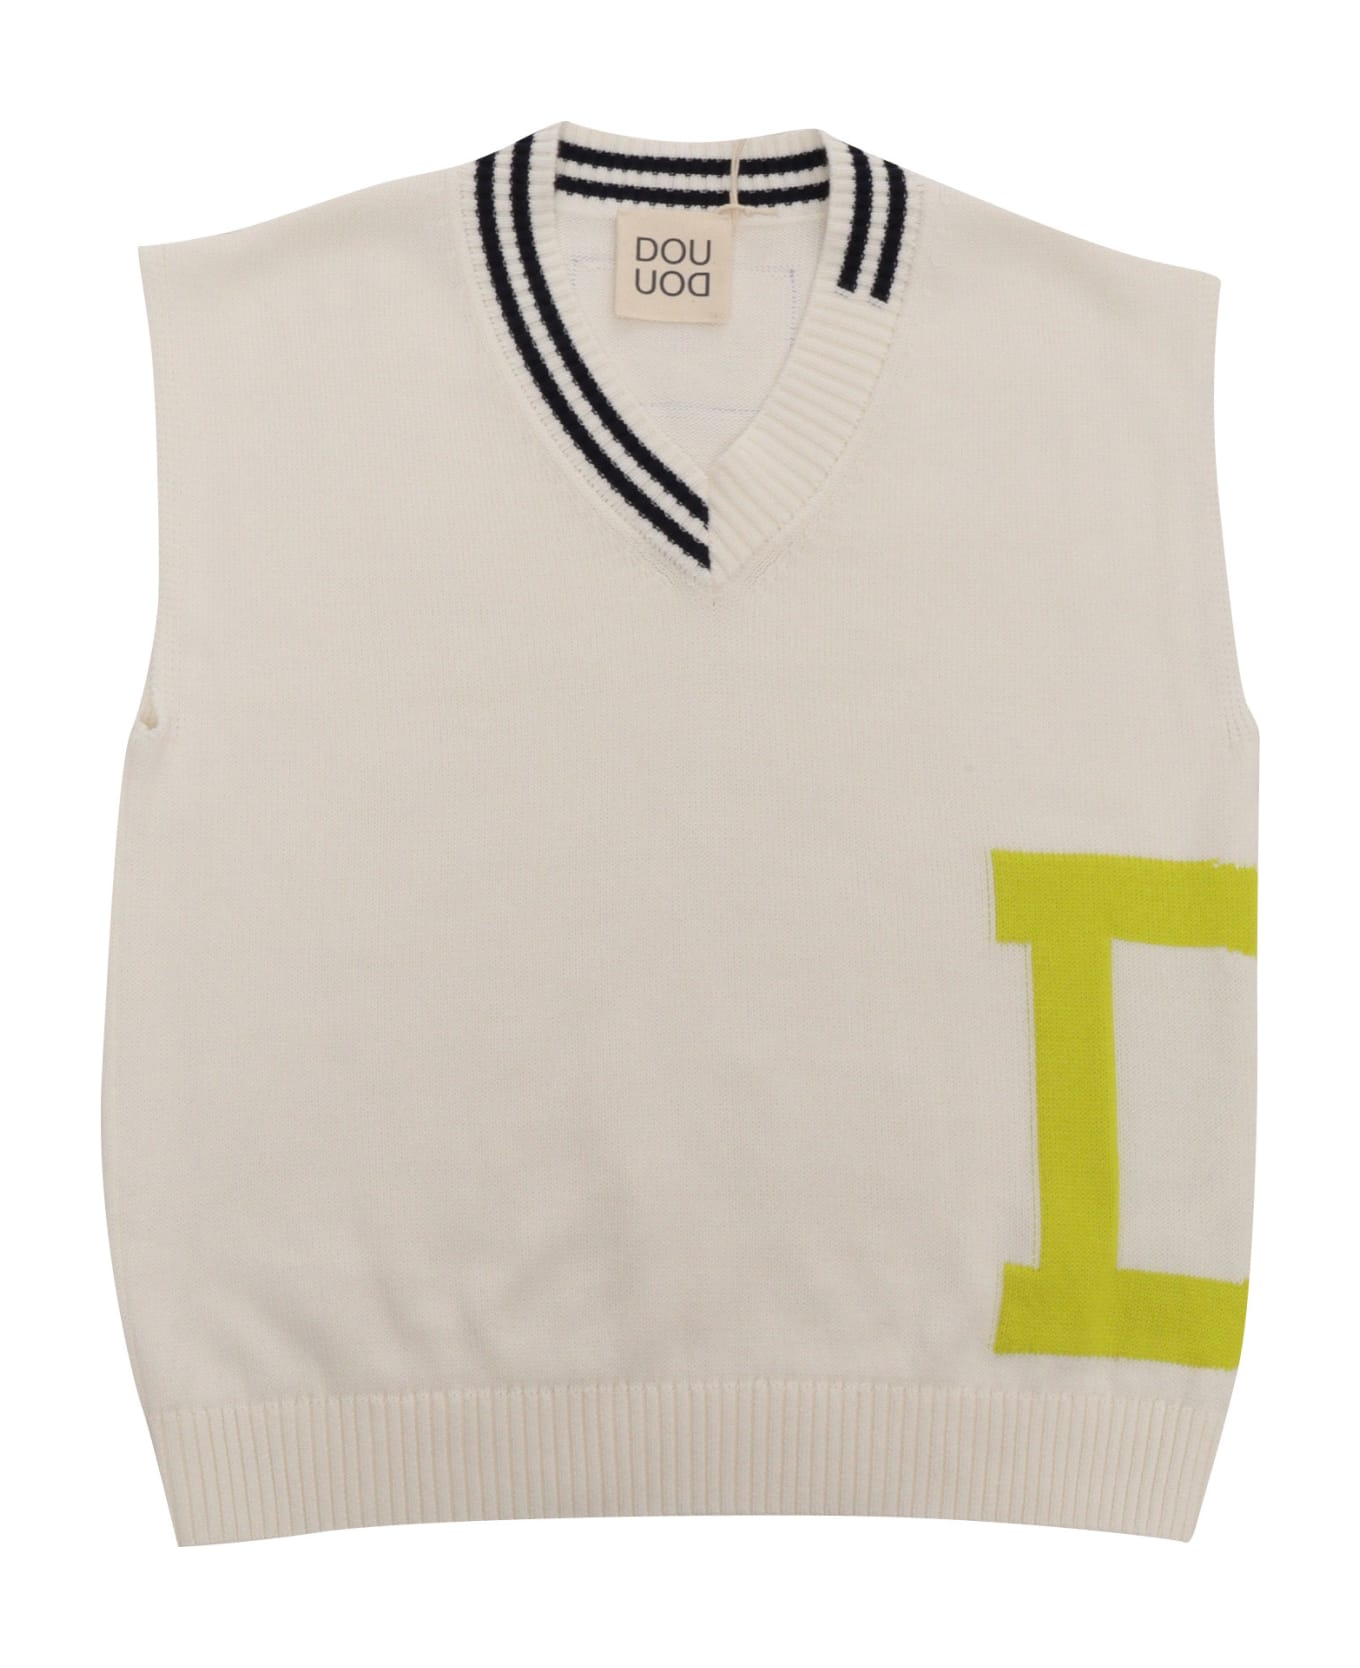 Douuod Knitted Vest - WHITE